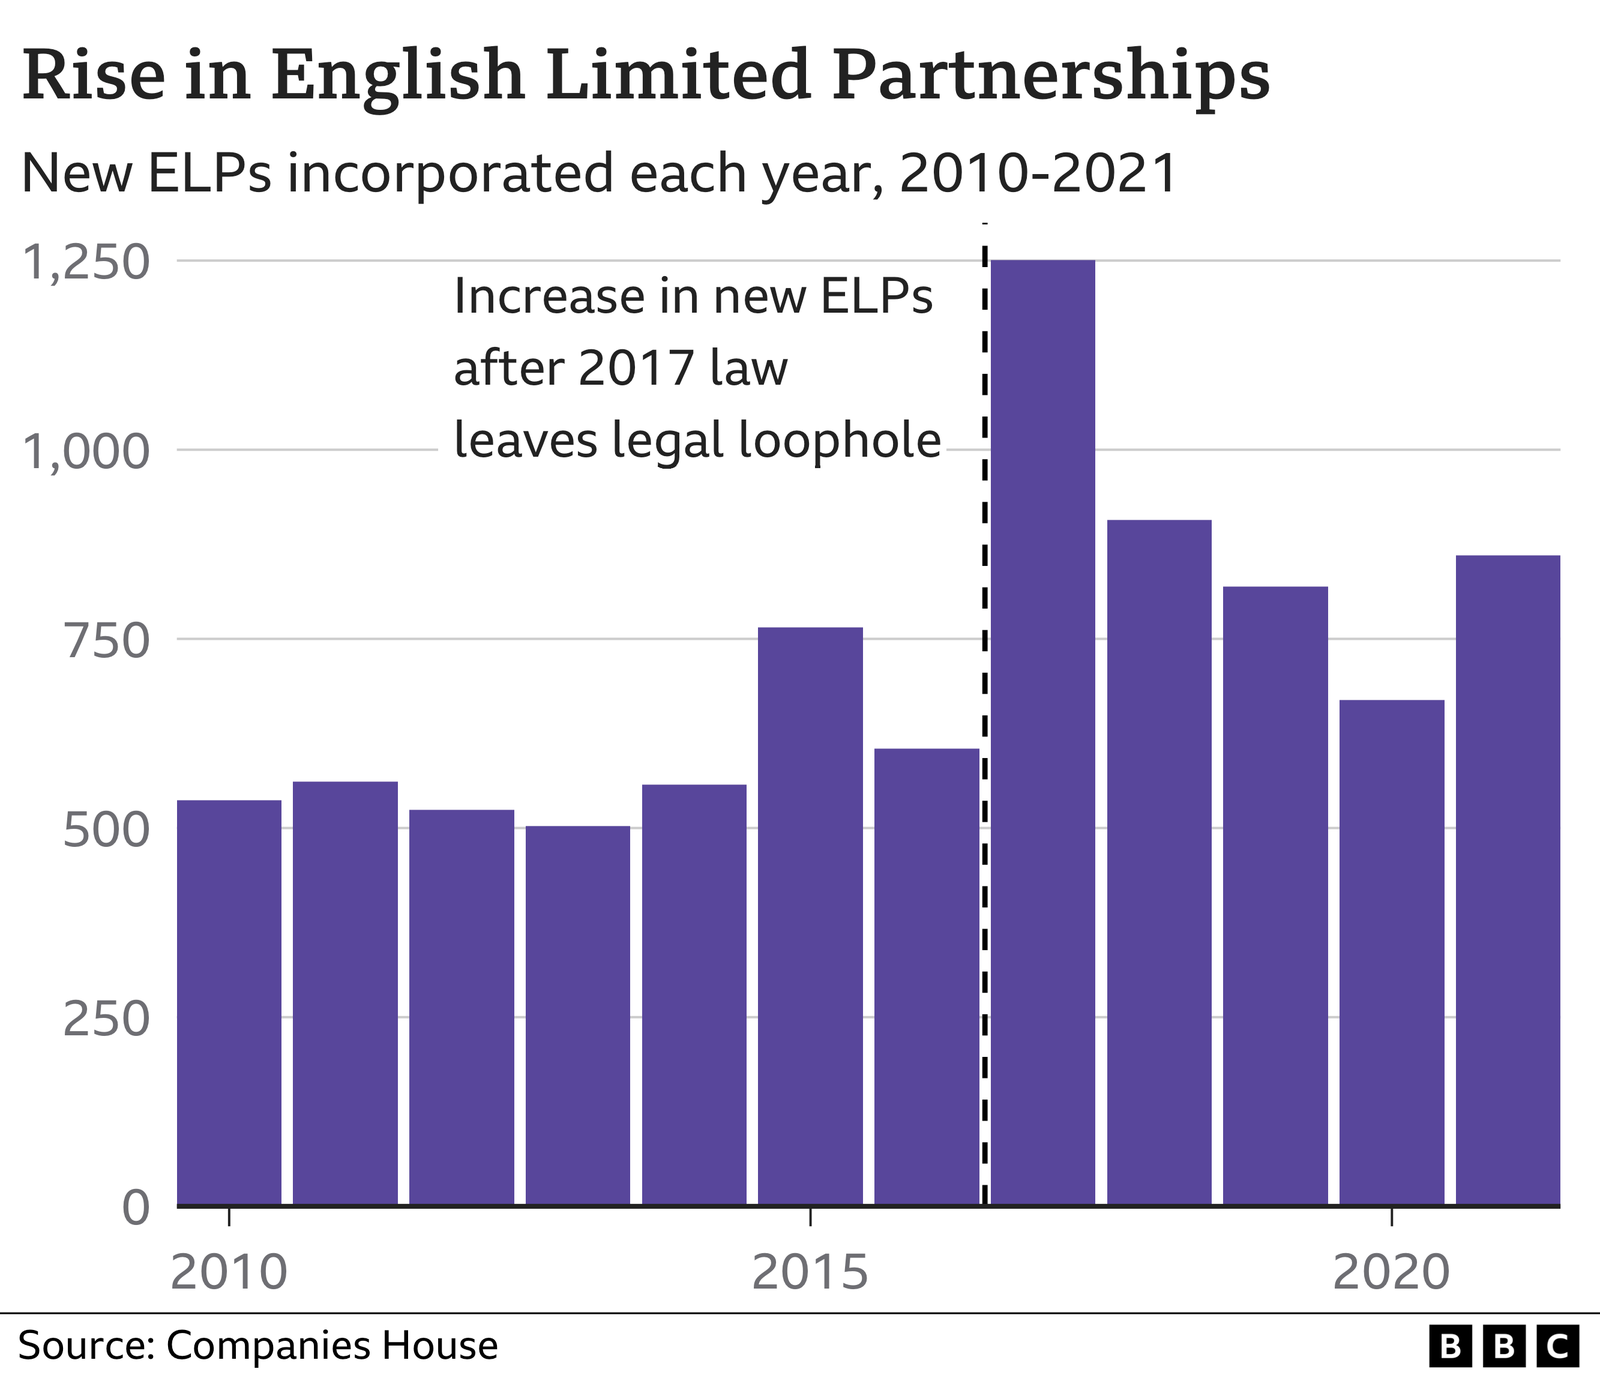 Chart showing a rise in English Limited Partnenships after 2017 law leaves legal loophole